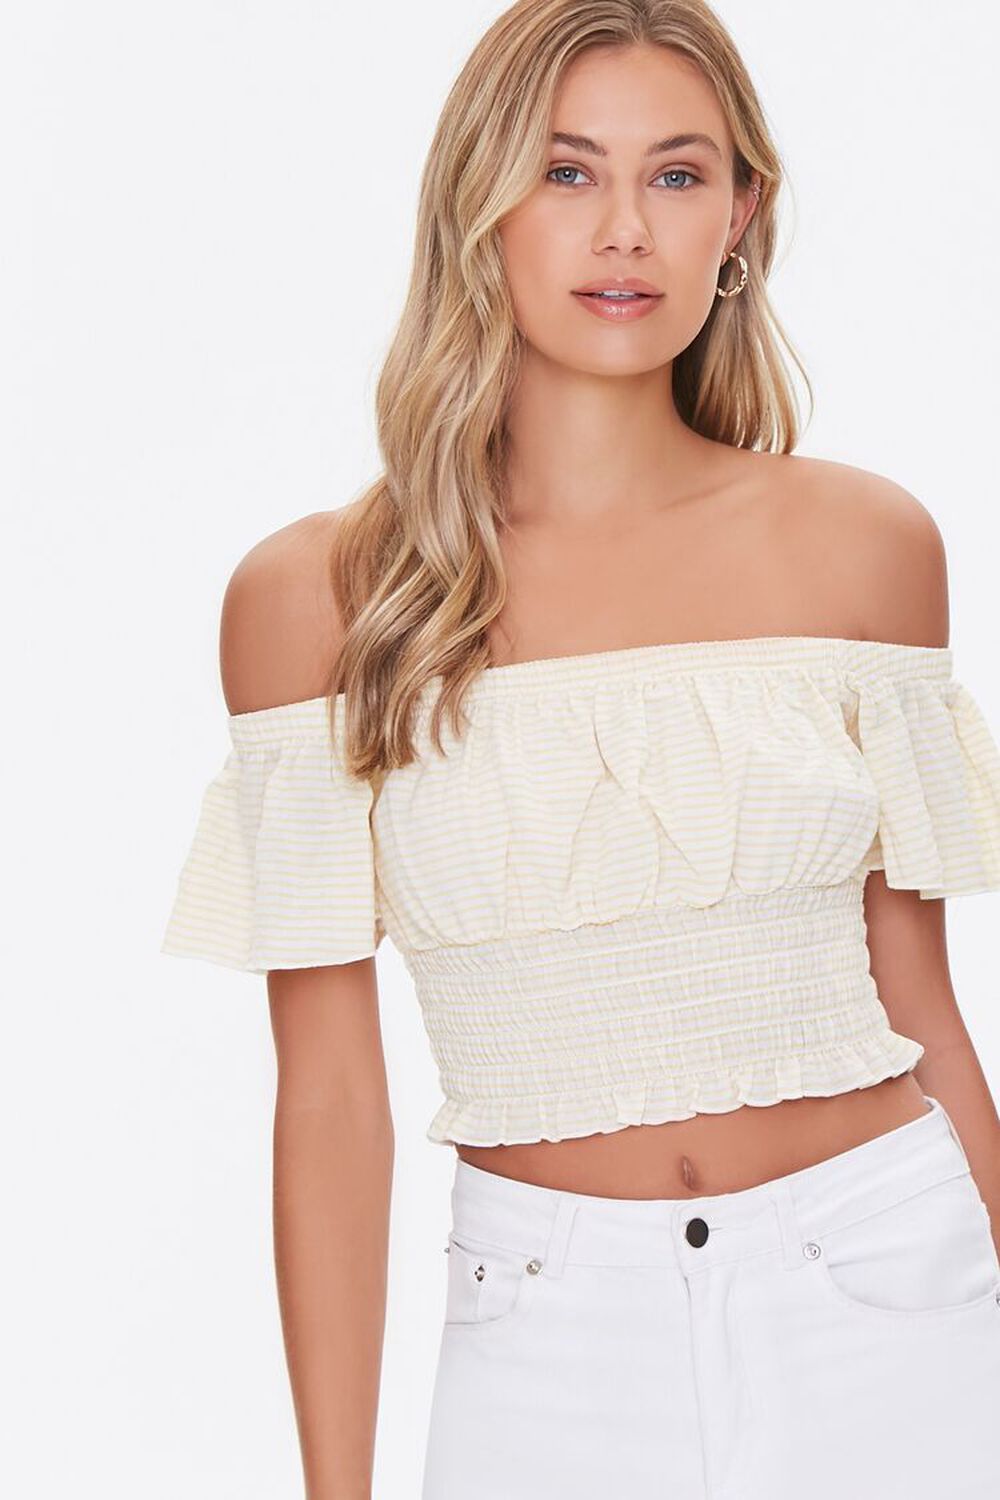 LIGHT YELLOW/BEIGE Striped Off-the-Shoulder Crop Top, image 1